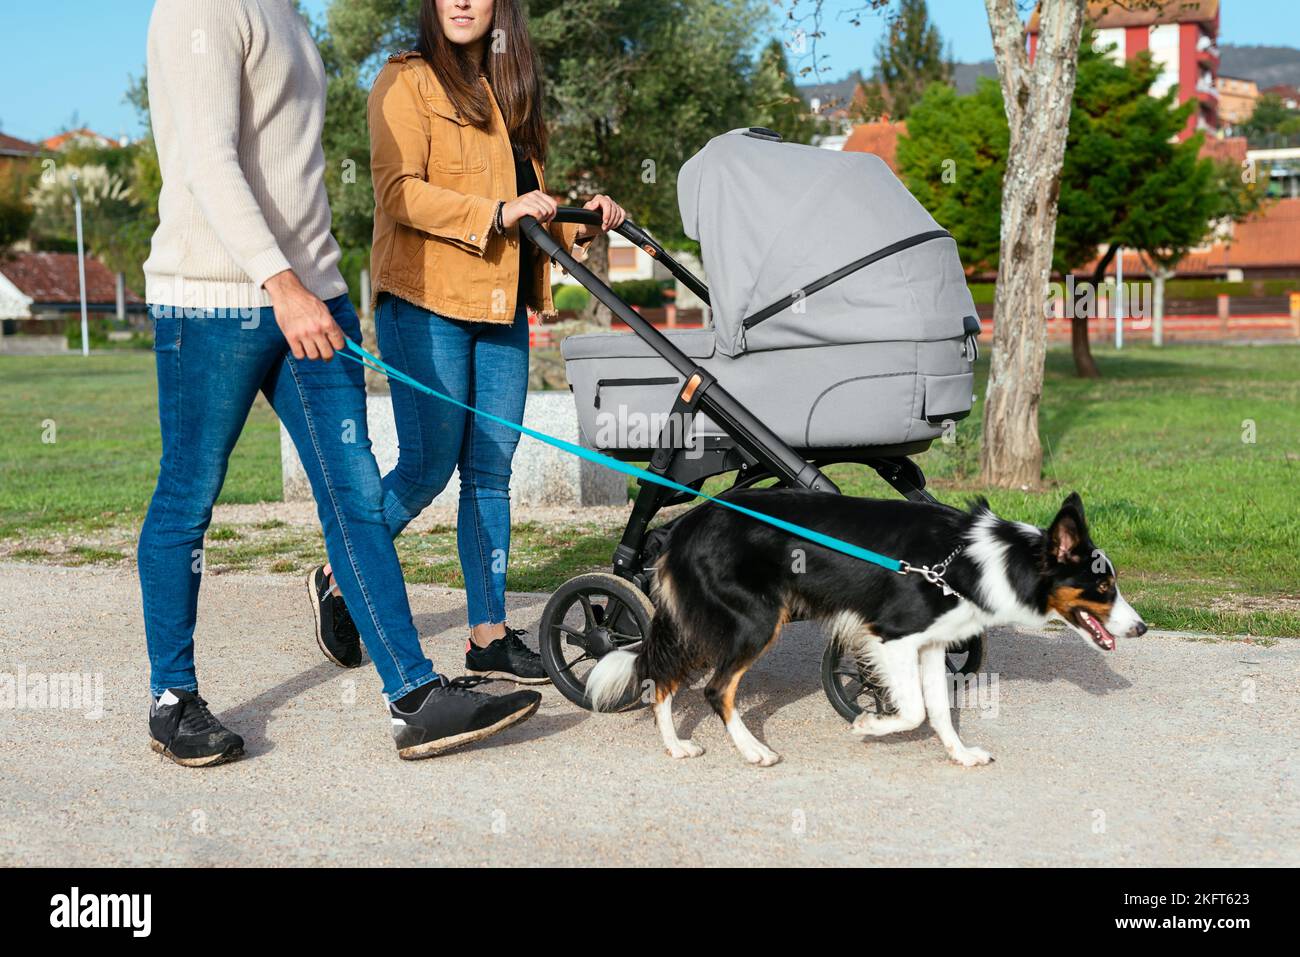 Glad couple with stroller and dog walking together on footpath against green lawn and trees during promenade in summer Stock Photo